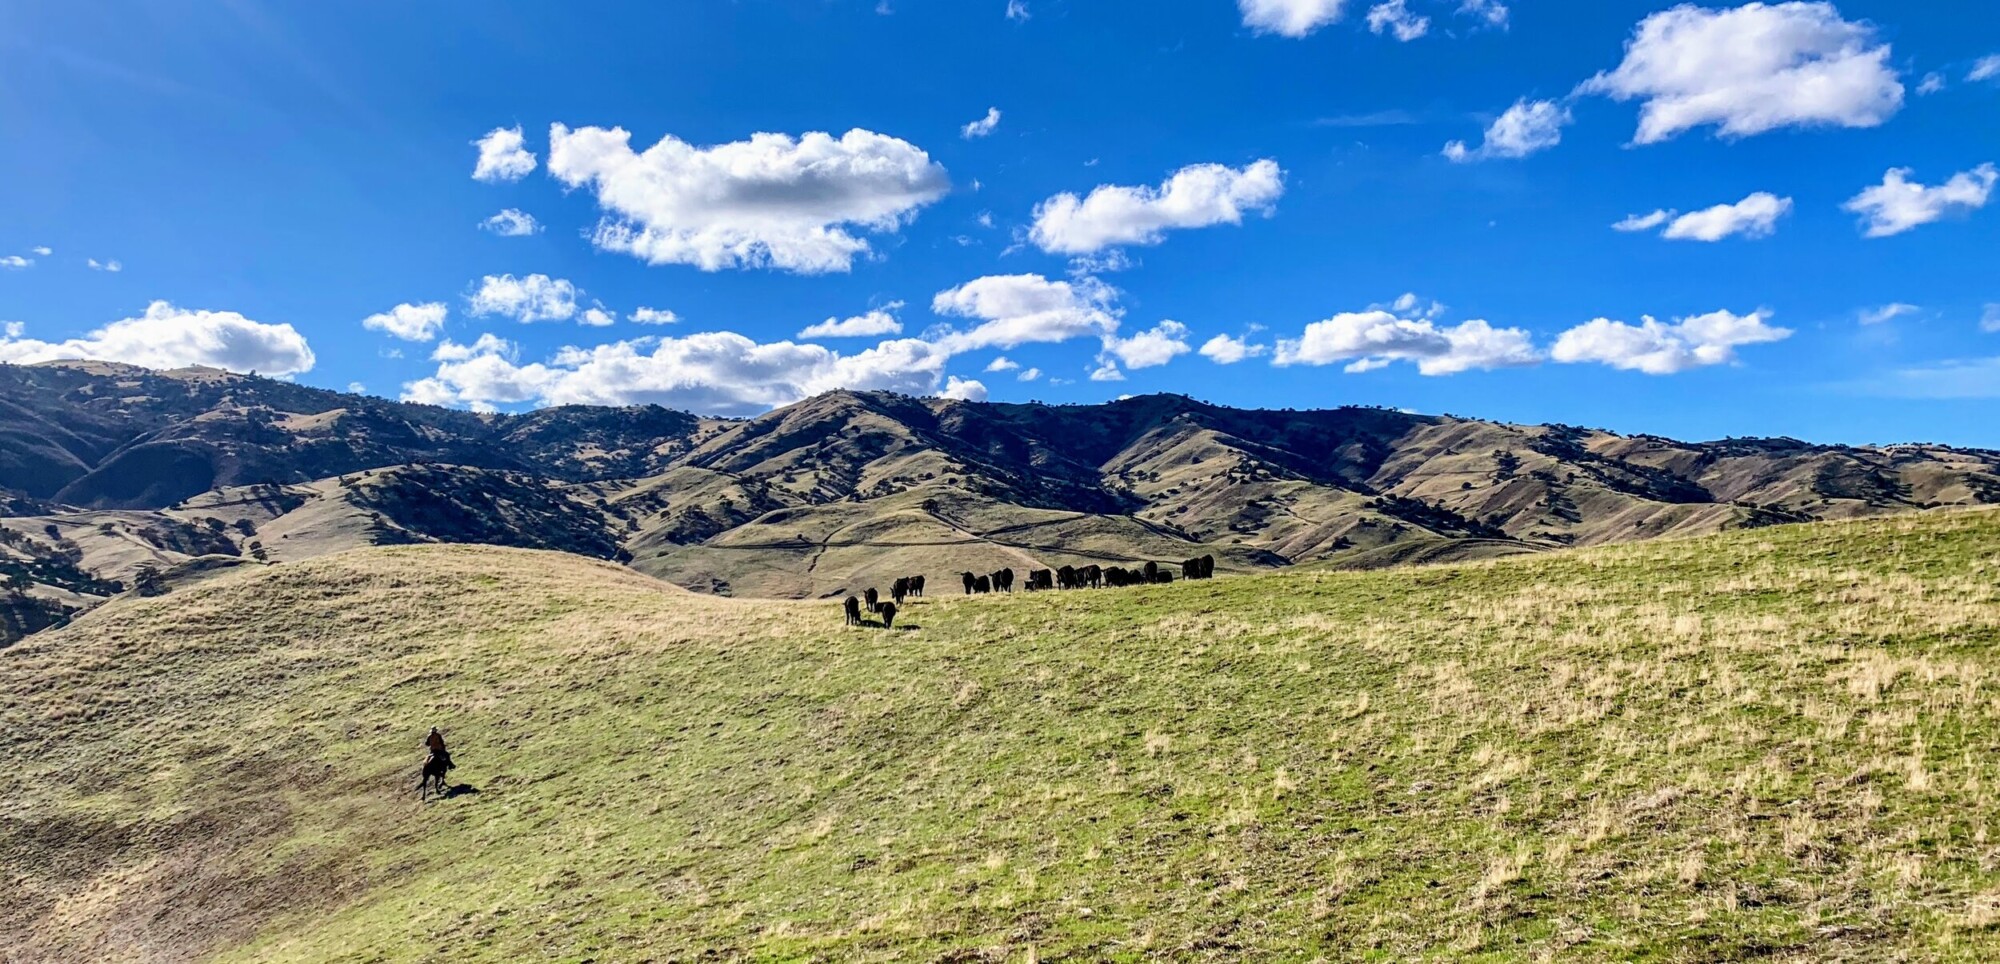 Green-gold rolling hills, with group of cattle in the foreground and blue sky with white clouds